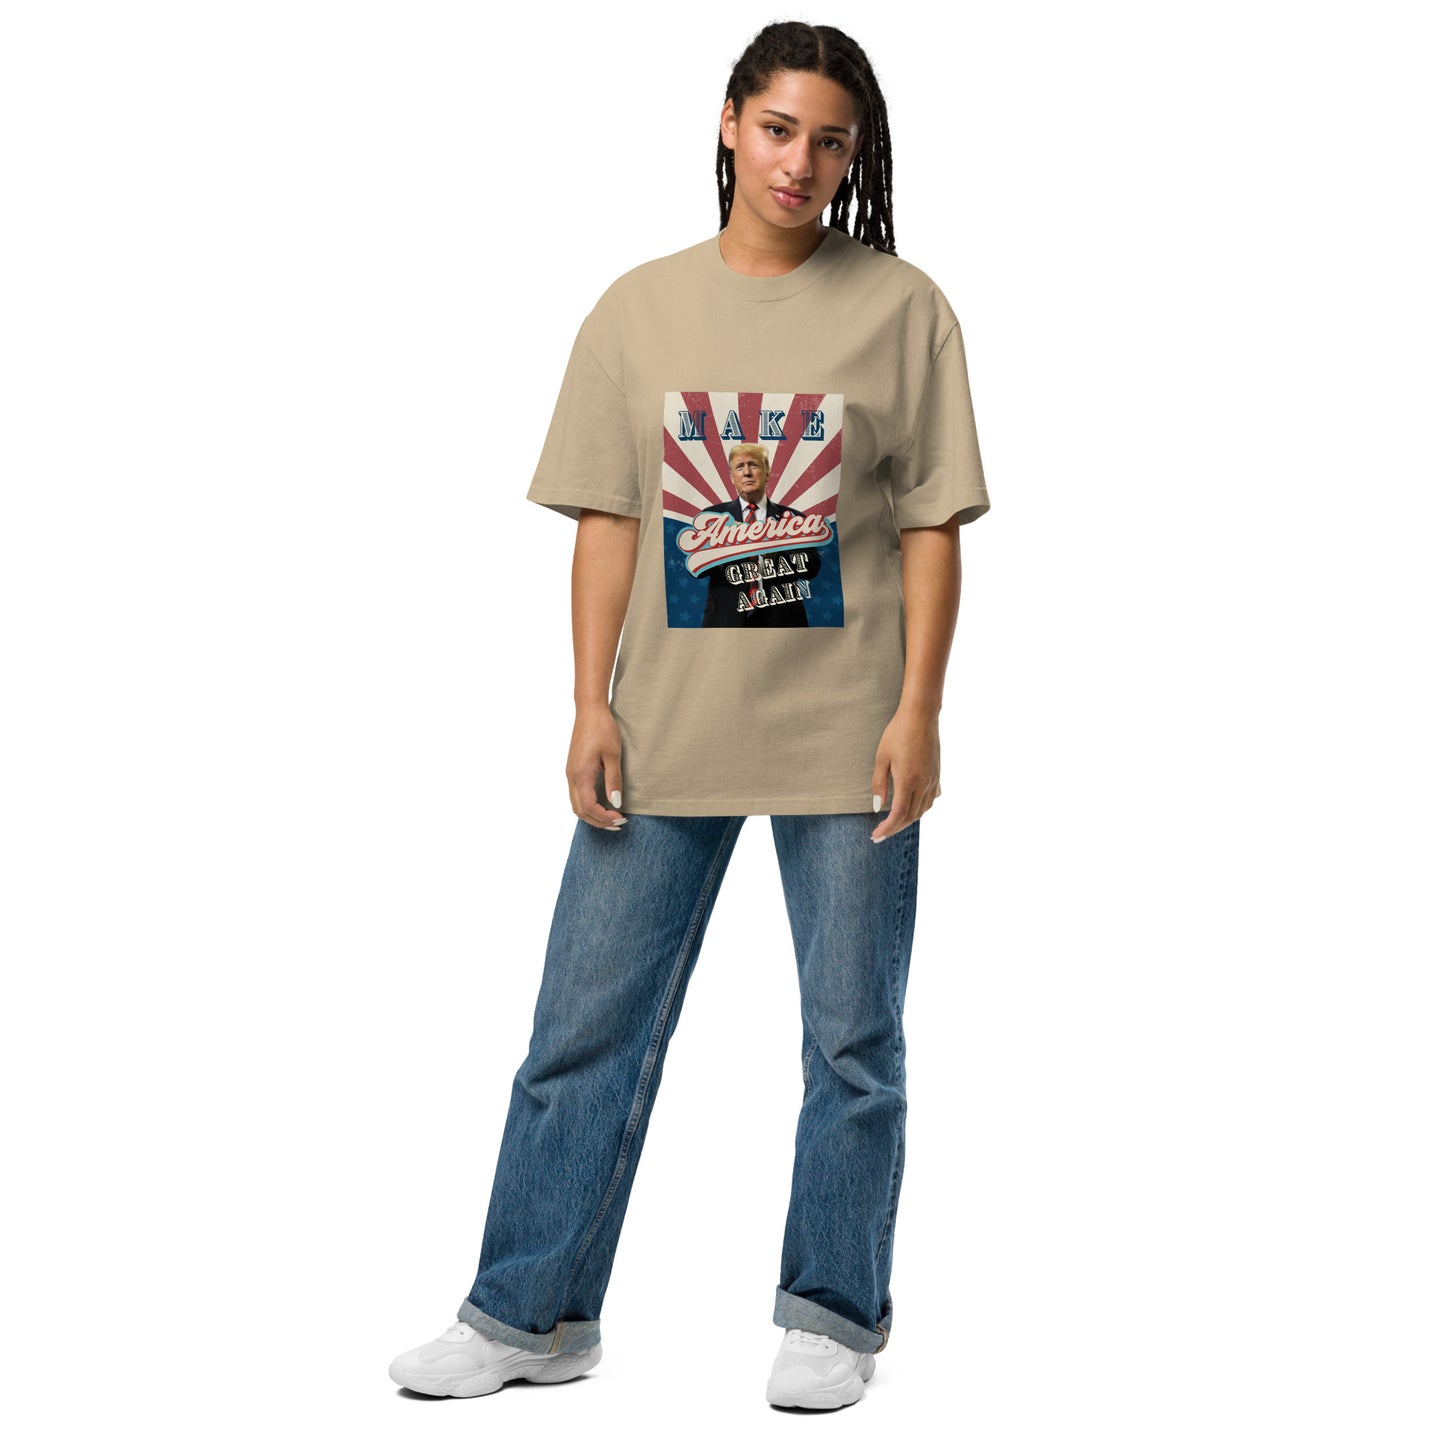 MAKE AMERICA GREAT AGAIN Oversized faded t-shirt